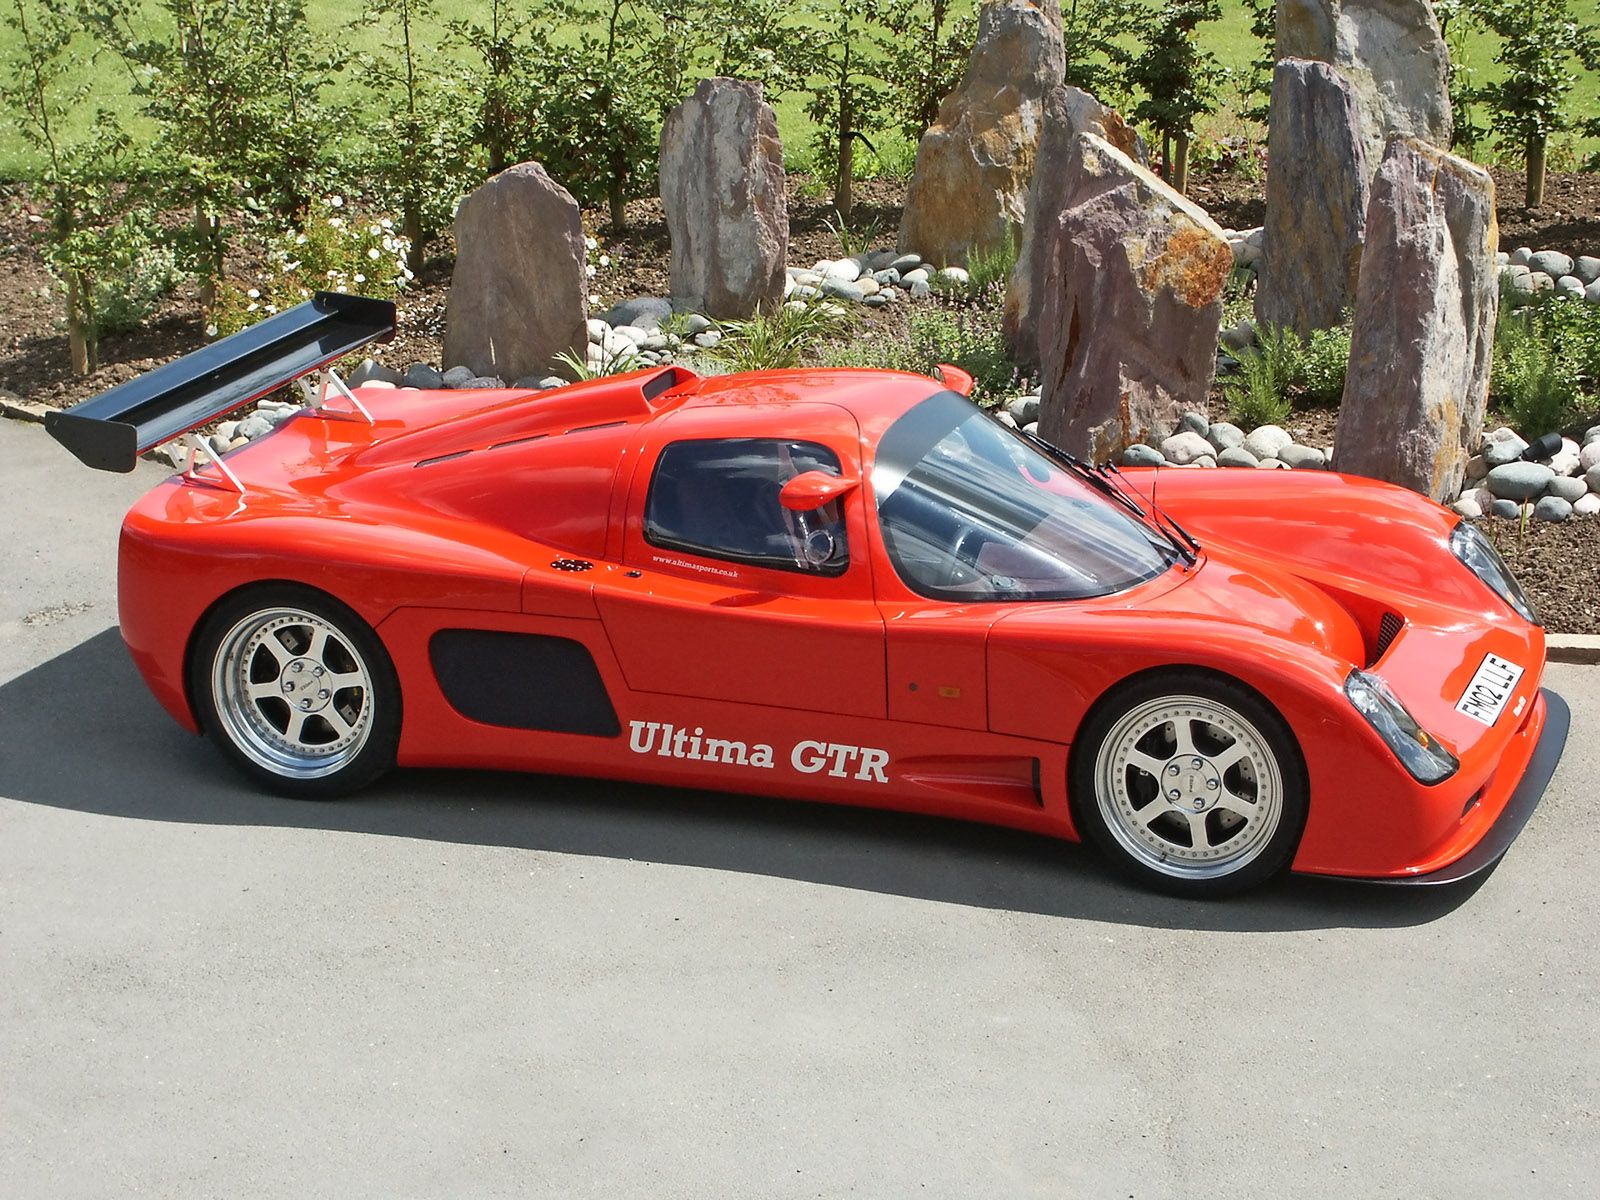 The First Ultima GTR